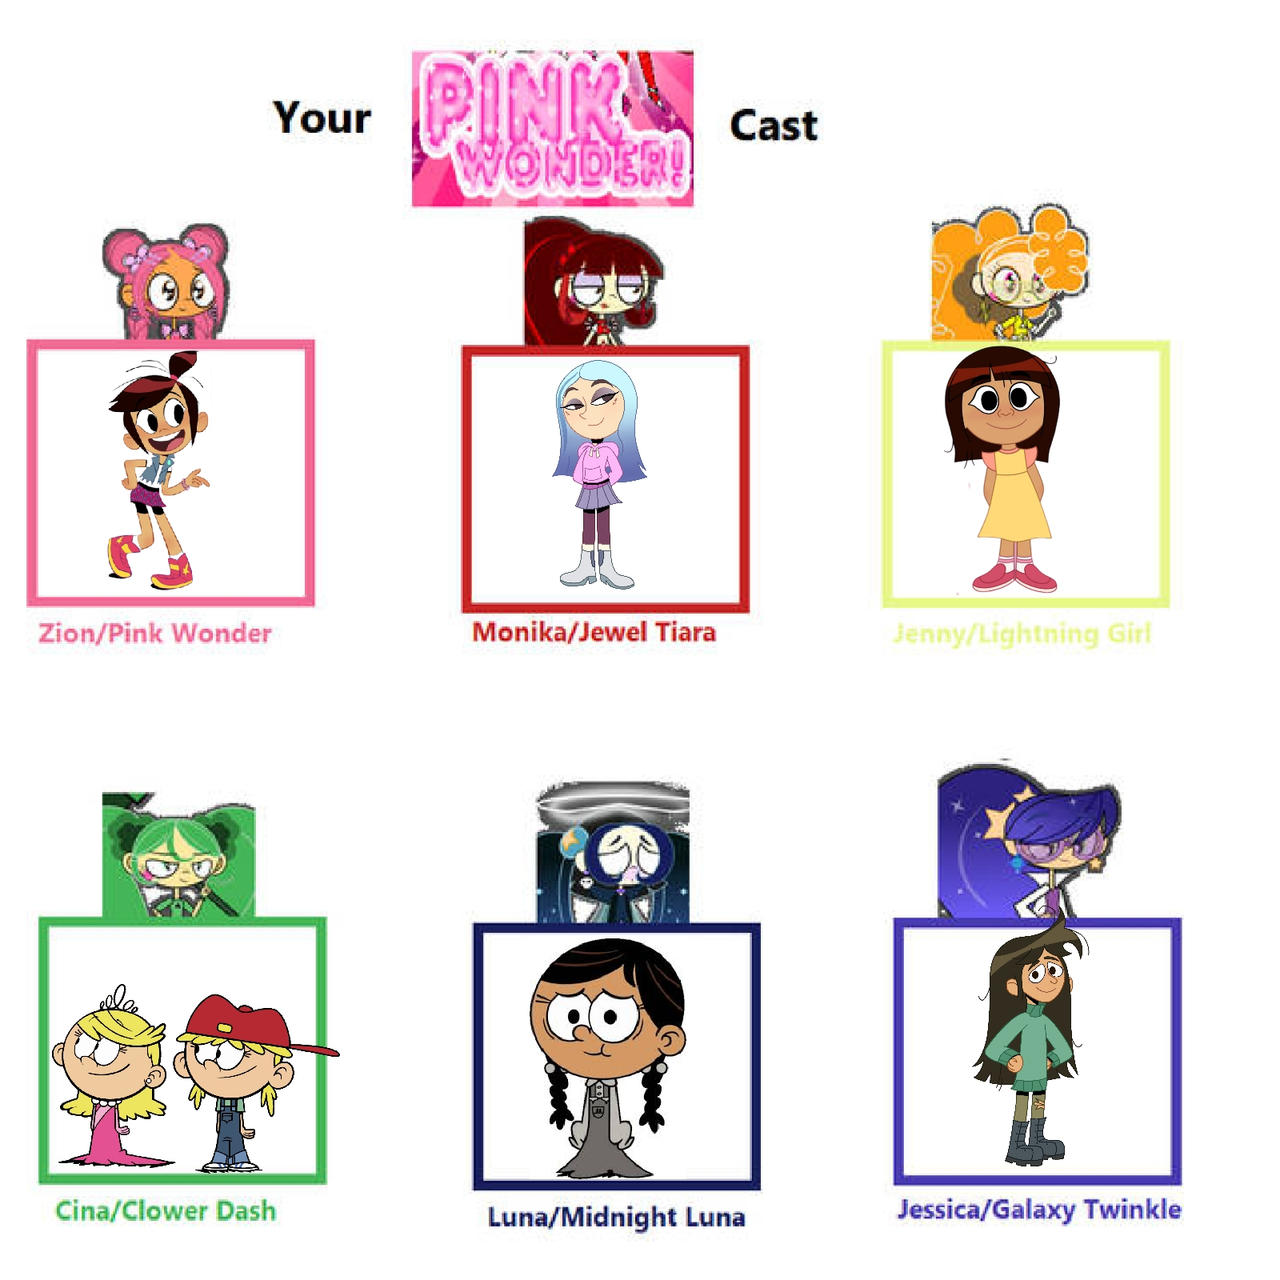 Tgamm/Tlh characters as pink wonder cast by Ultimatebrawlers on